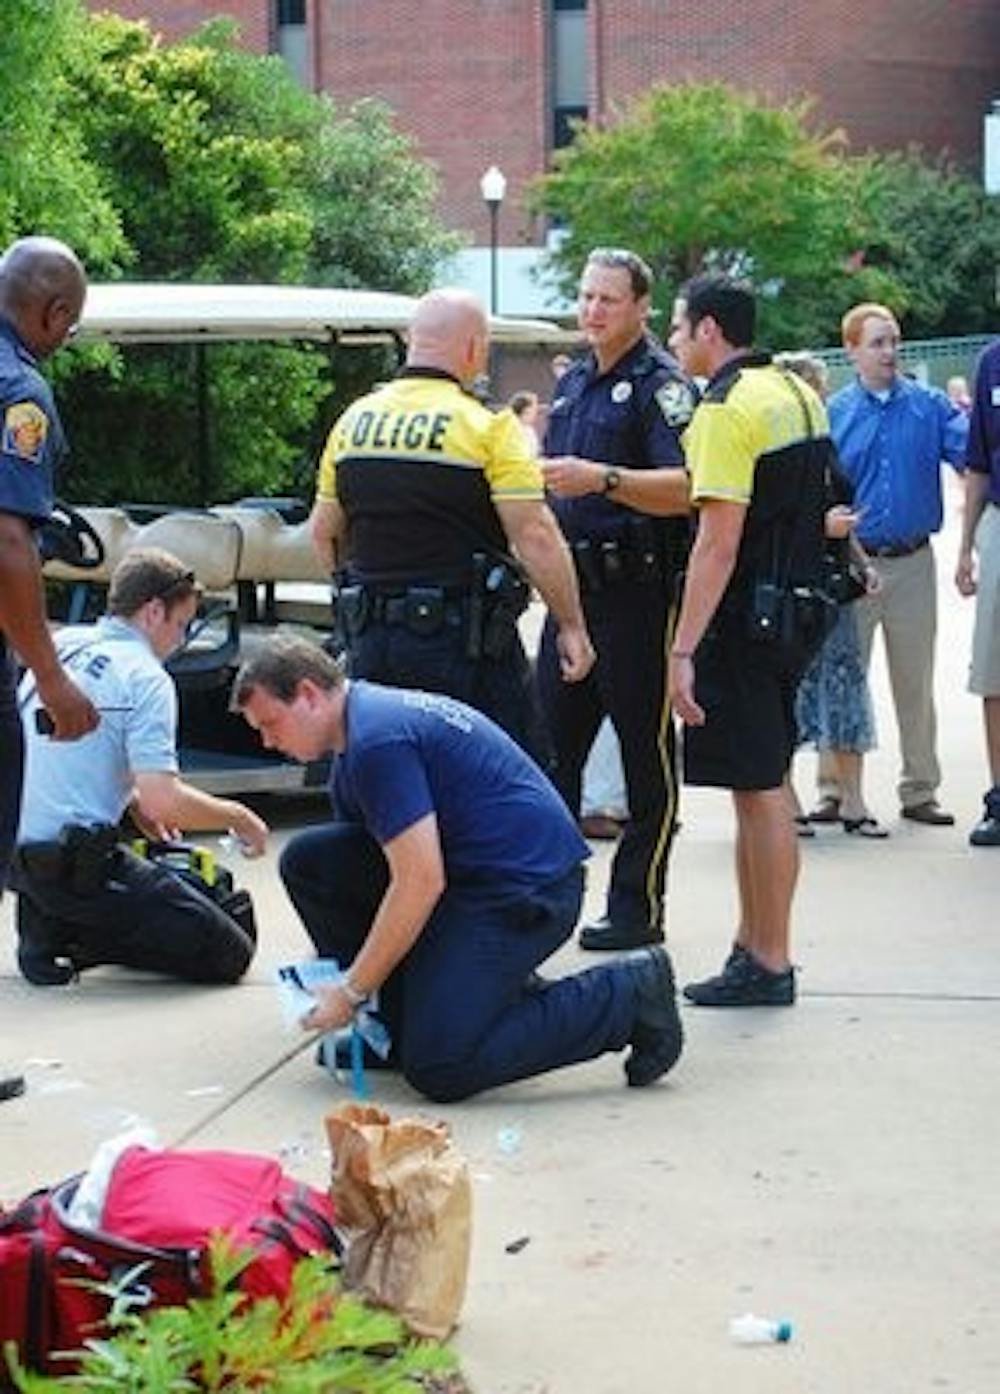 Auburn police officers and EMT personnel clean up materials in front of Little Hall where a man collapsed on Monday afternoon. (Derek Lacey / ASSOCIATE CAMPUS EDITOR)